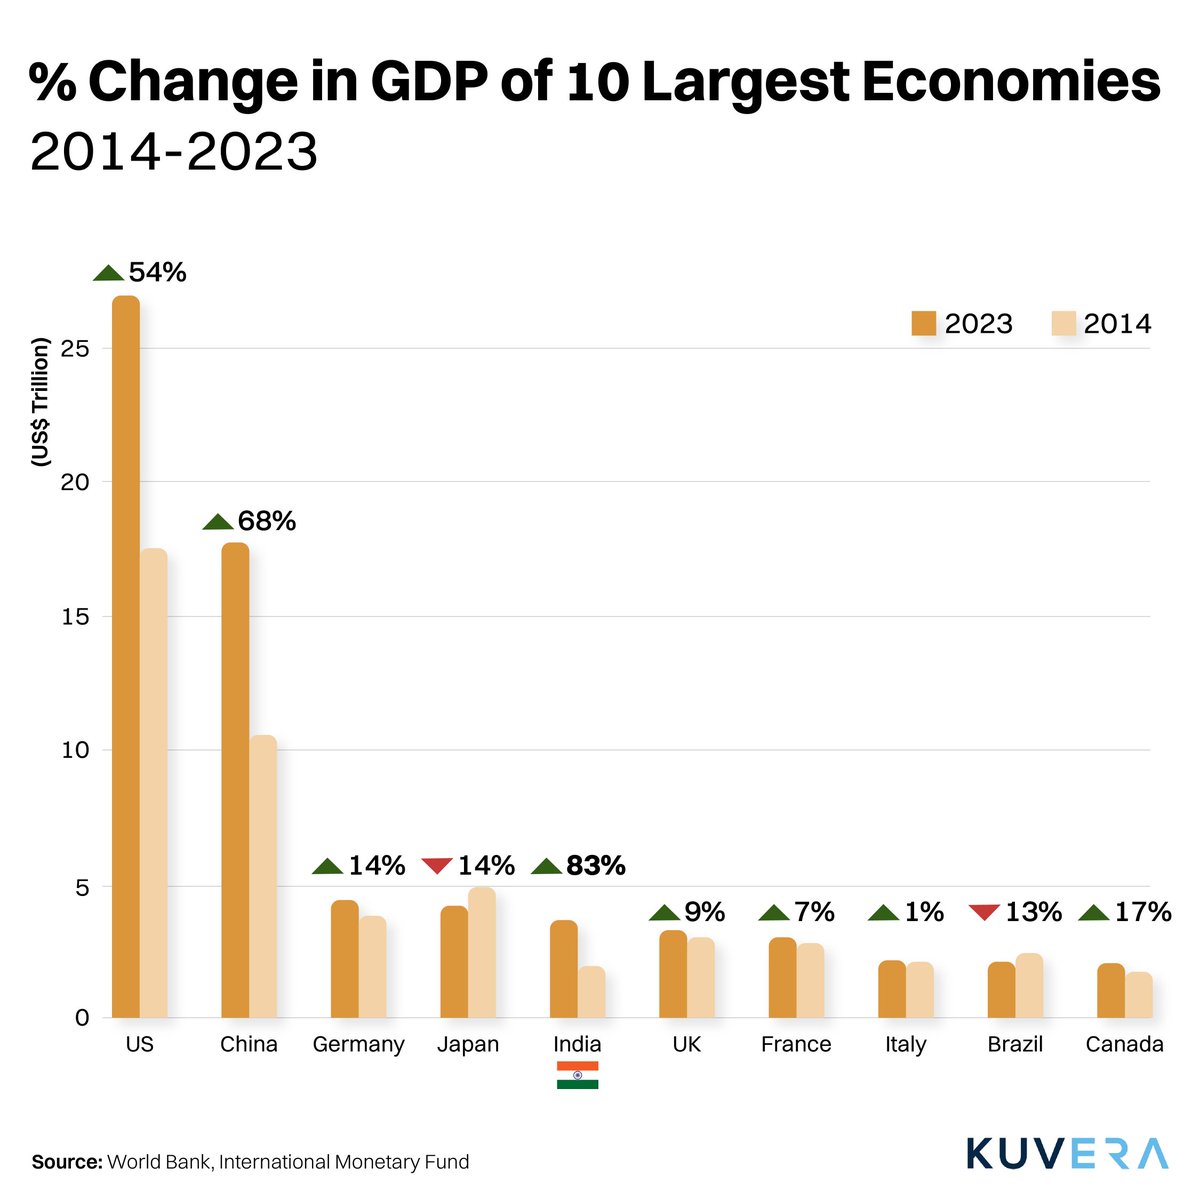 From 2014 to 2023, India registered an 83% growth in GDP, the highest among top 10 economies. 

#ChartOfTheDay